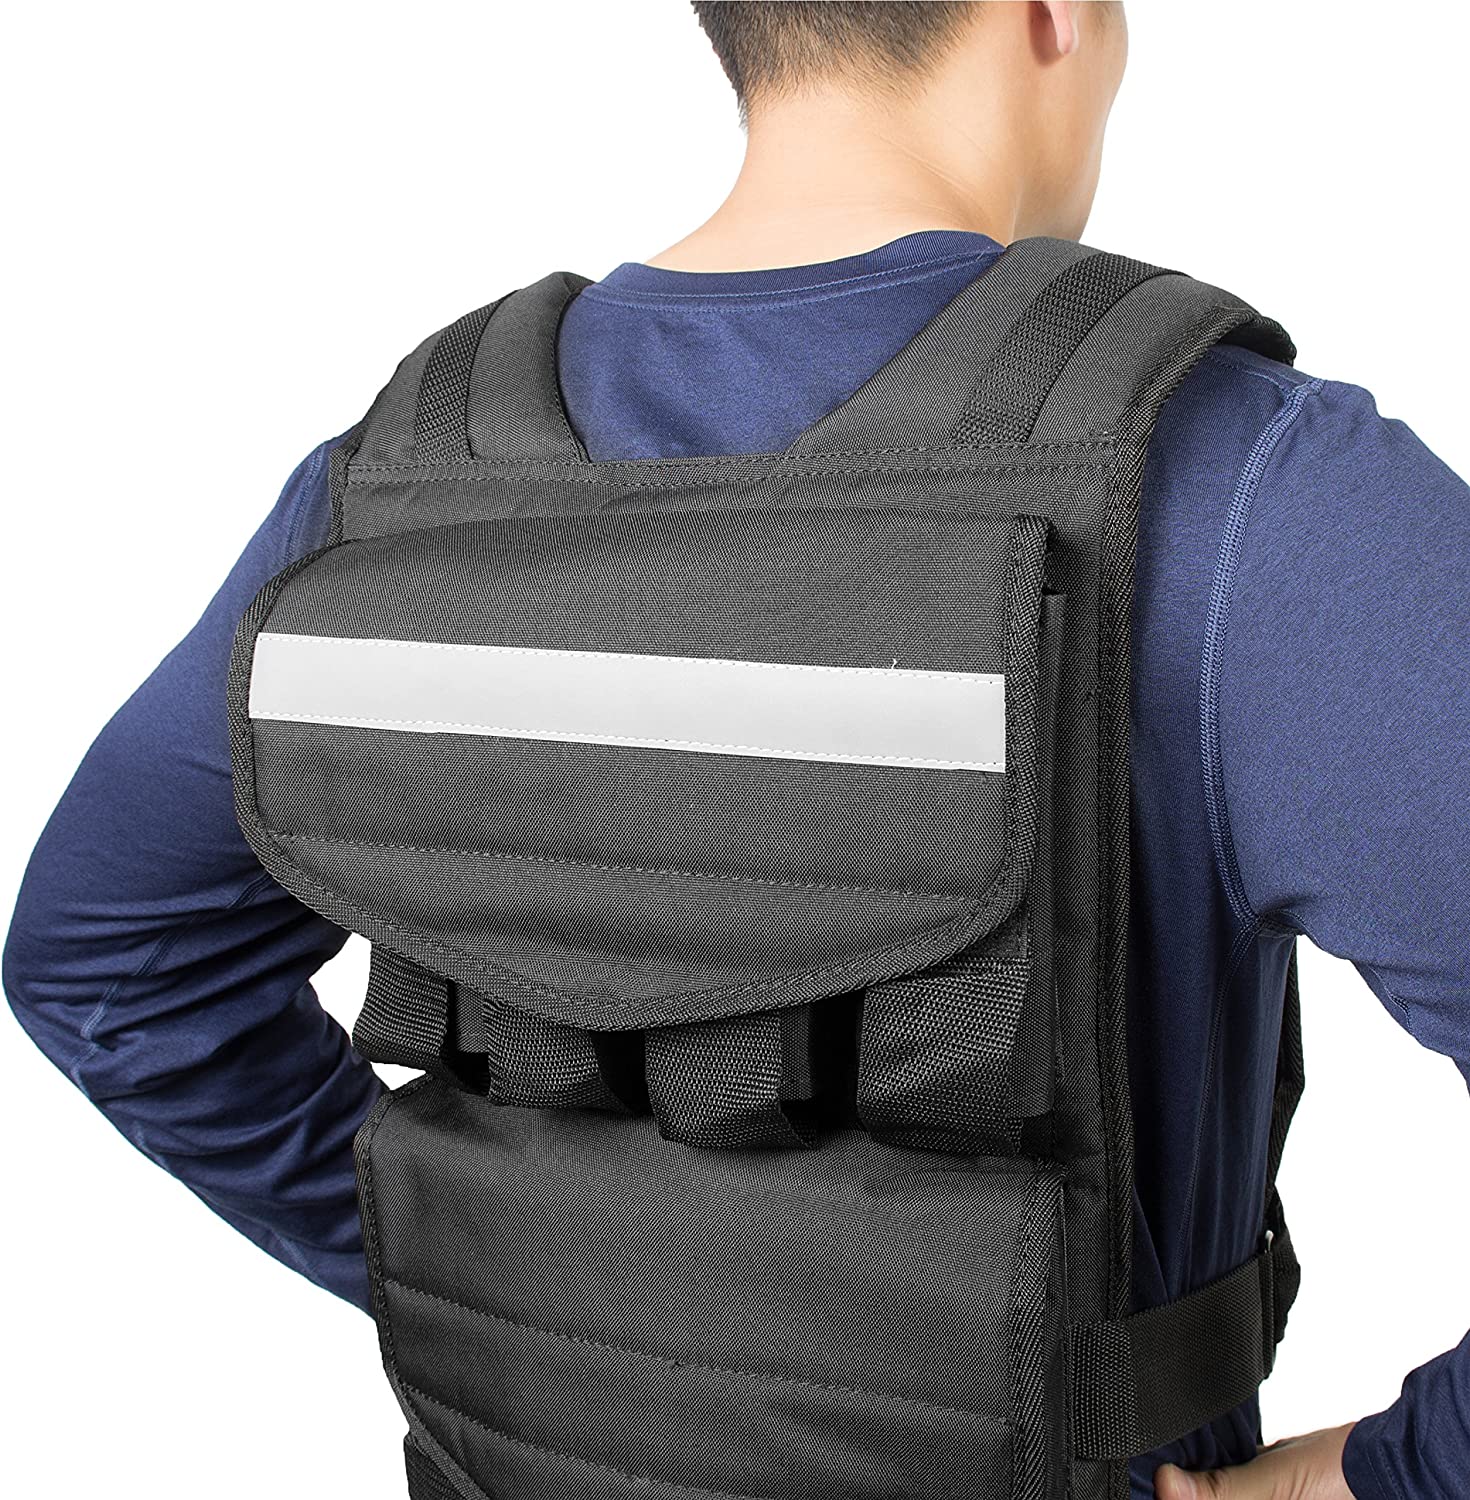 cap barbell adjustable weighted vest, 40 lb - image 4 of 5